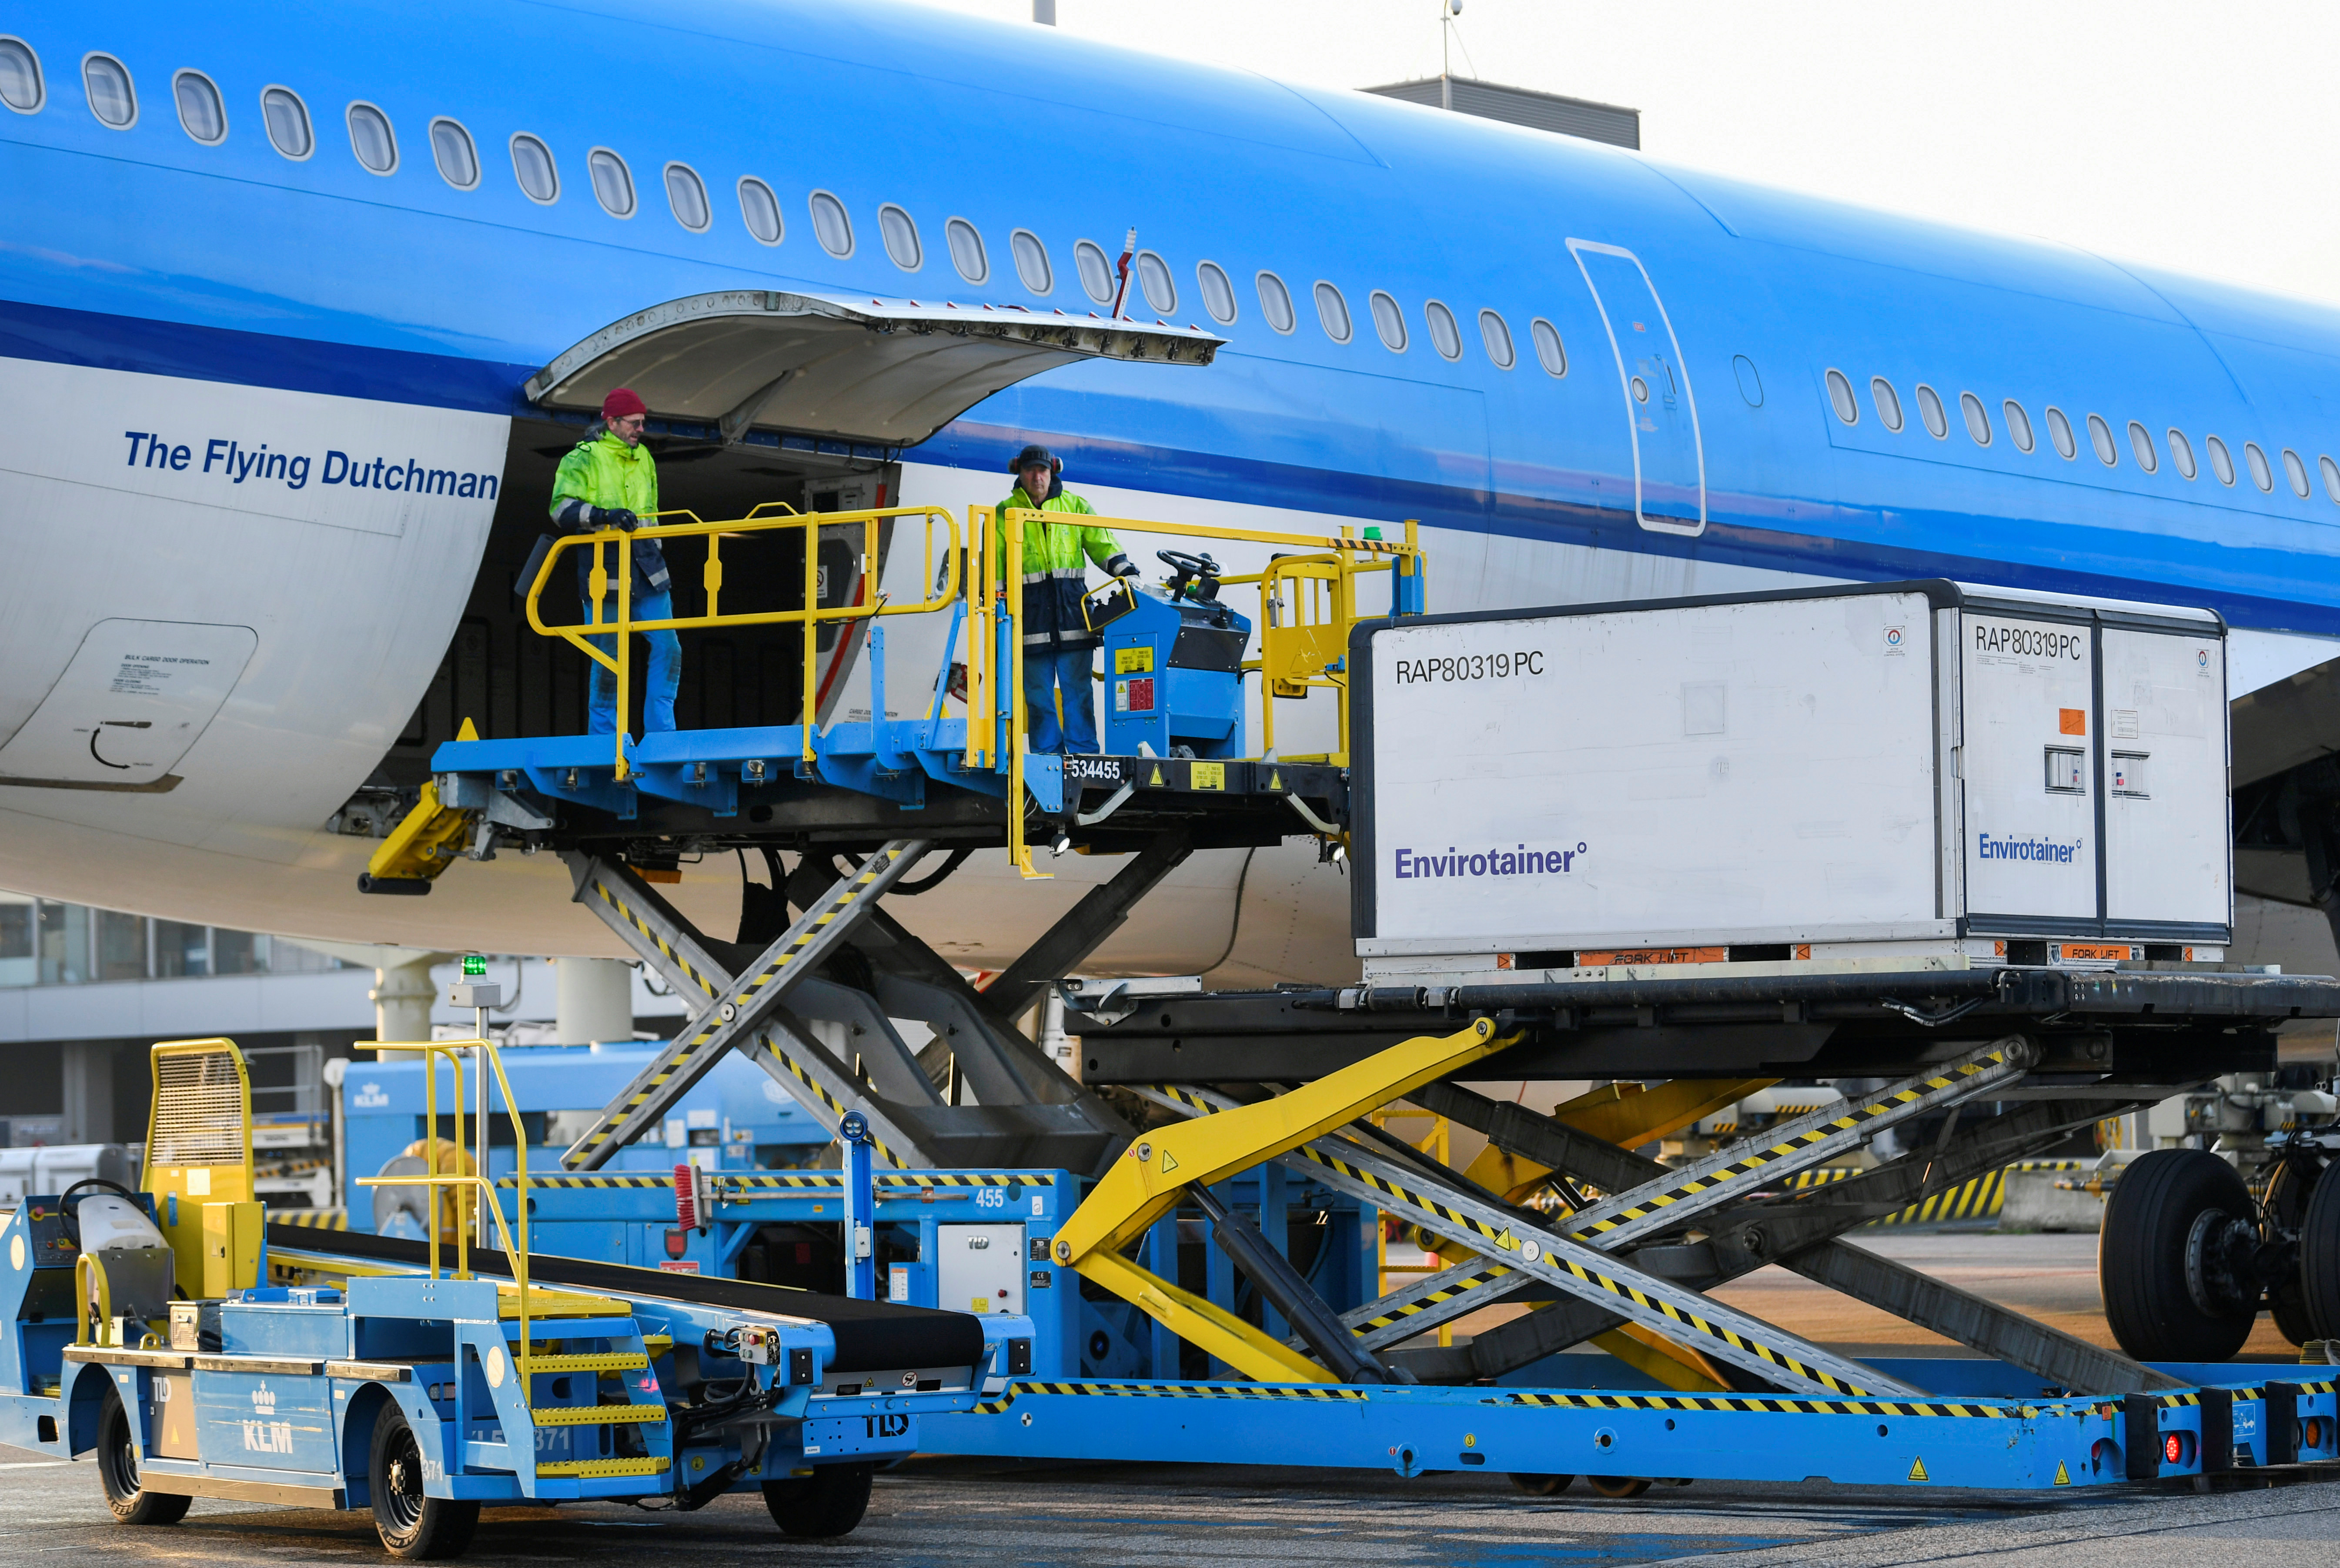 Cool boxes are being transported by airplane at Amsterdam's Schiphol Airport